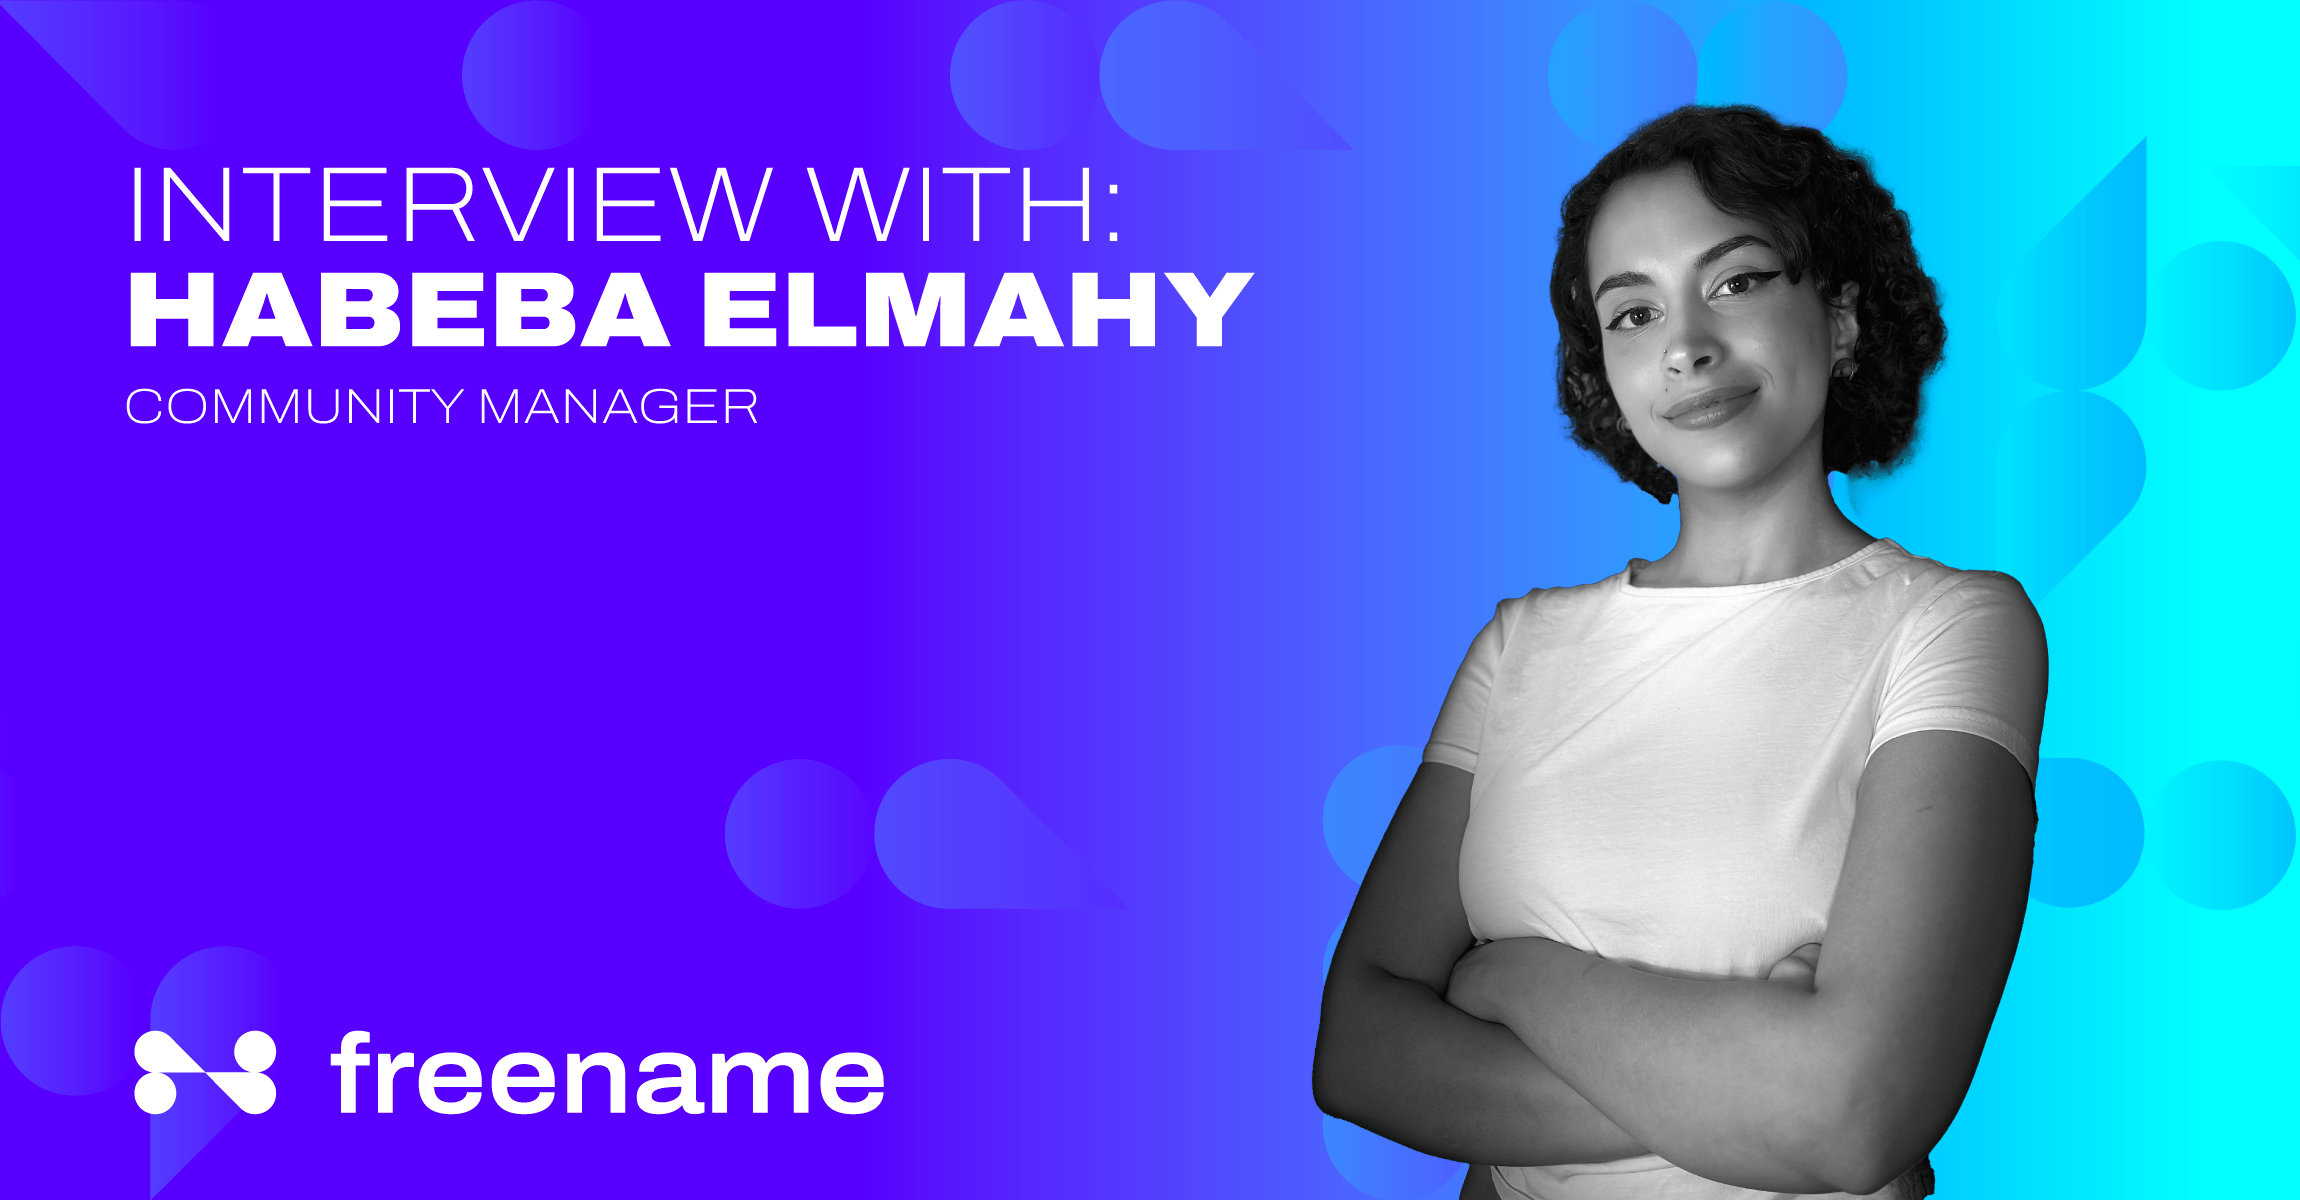 Interview with Habeba Elmahy, Community Manager